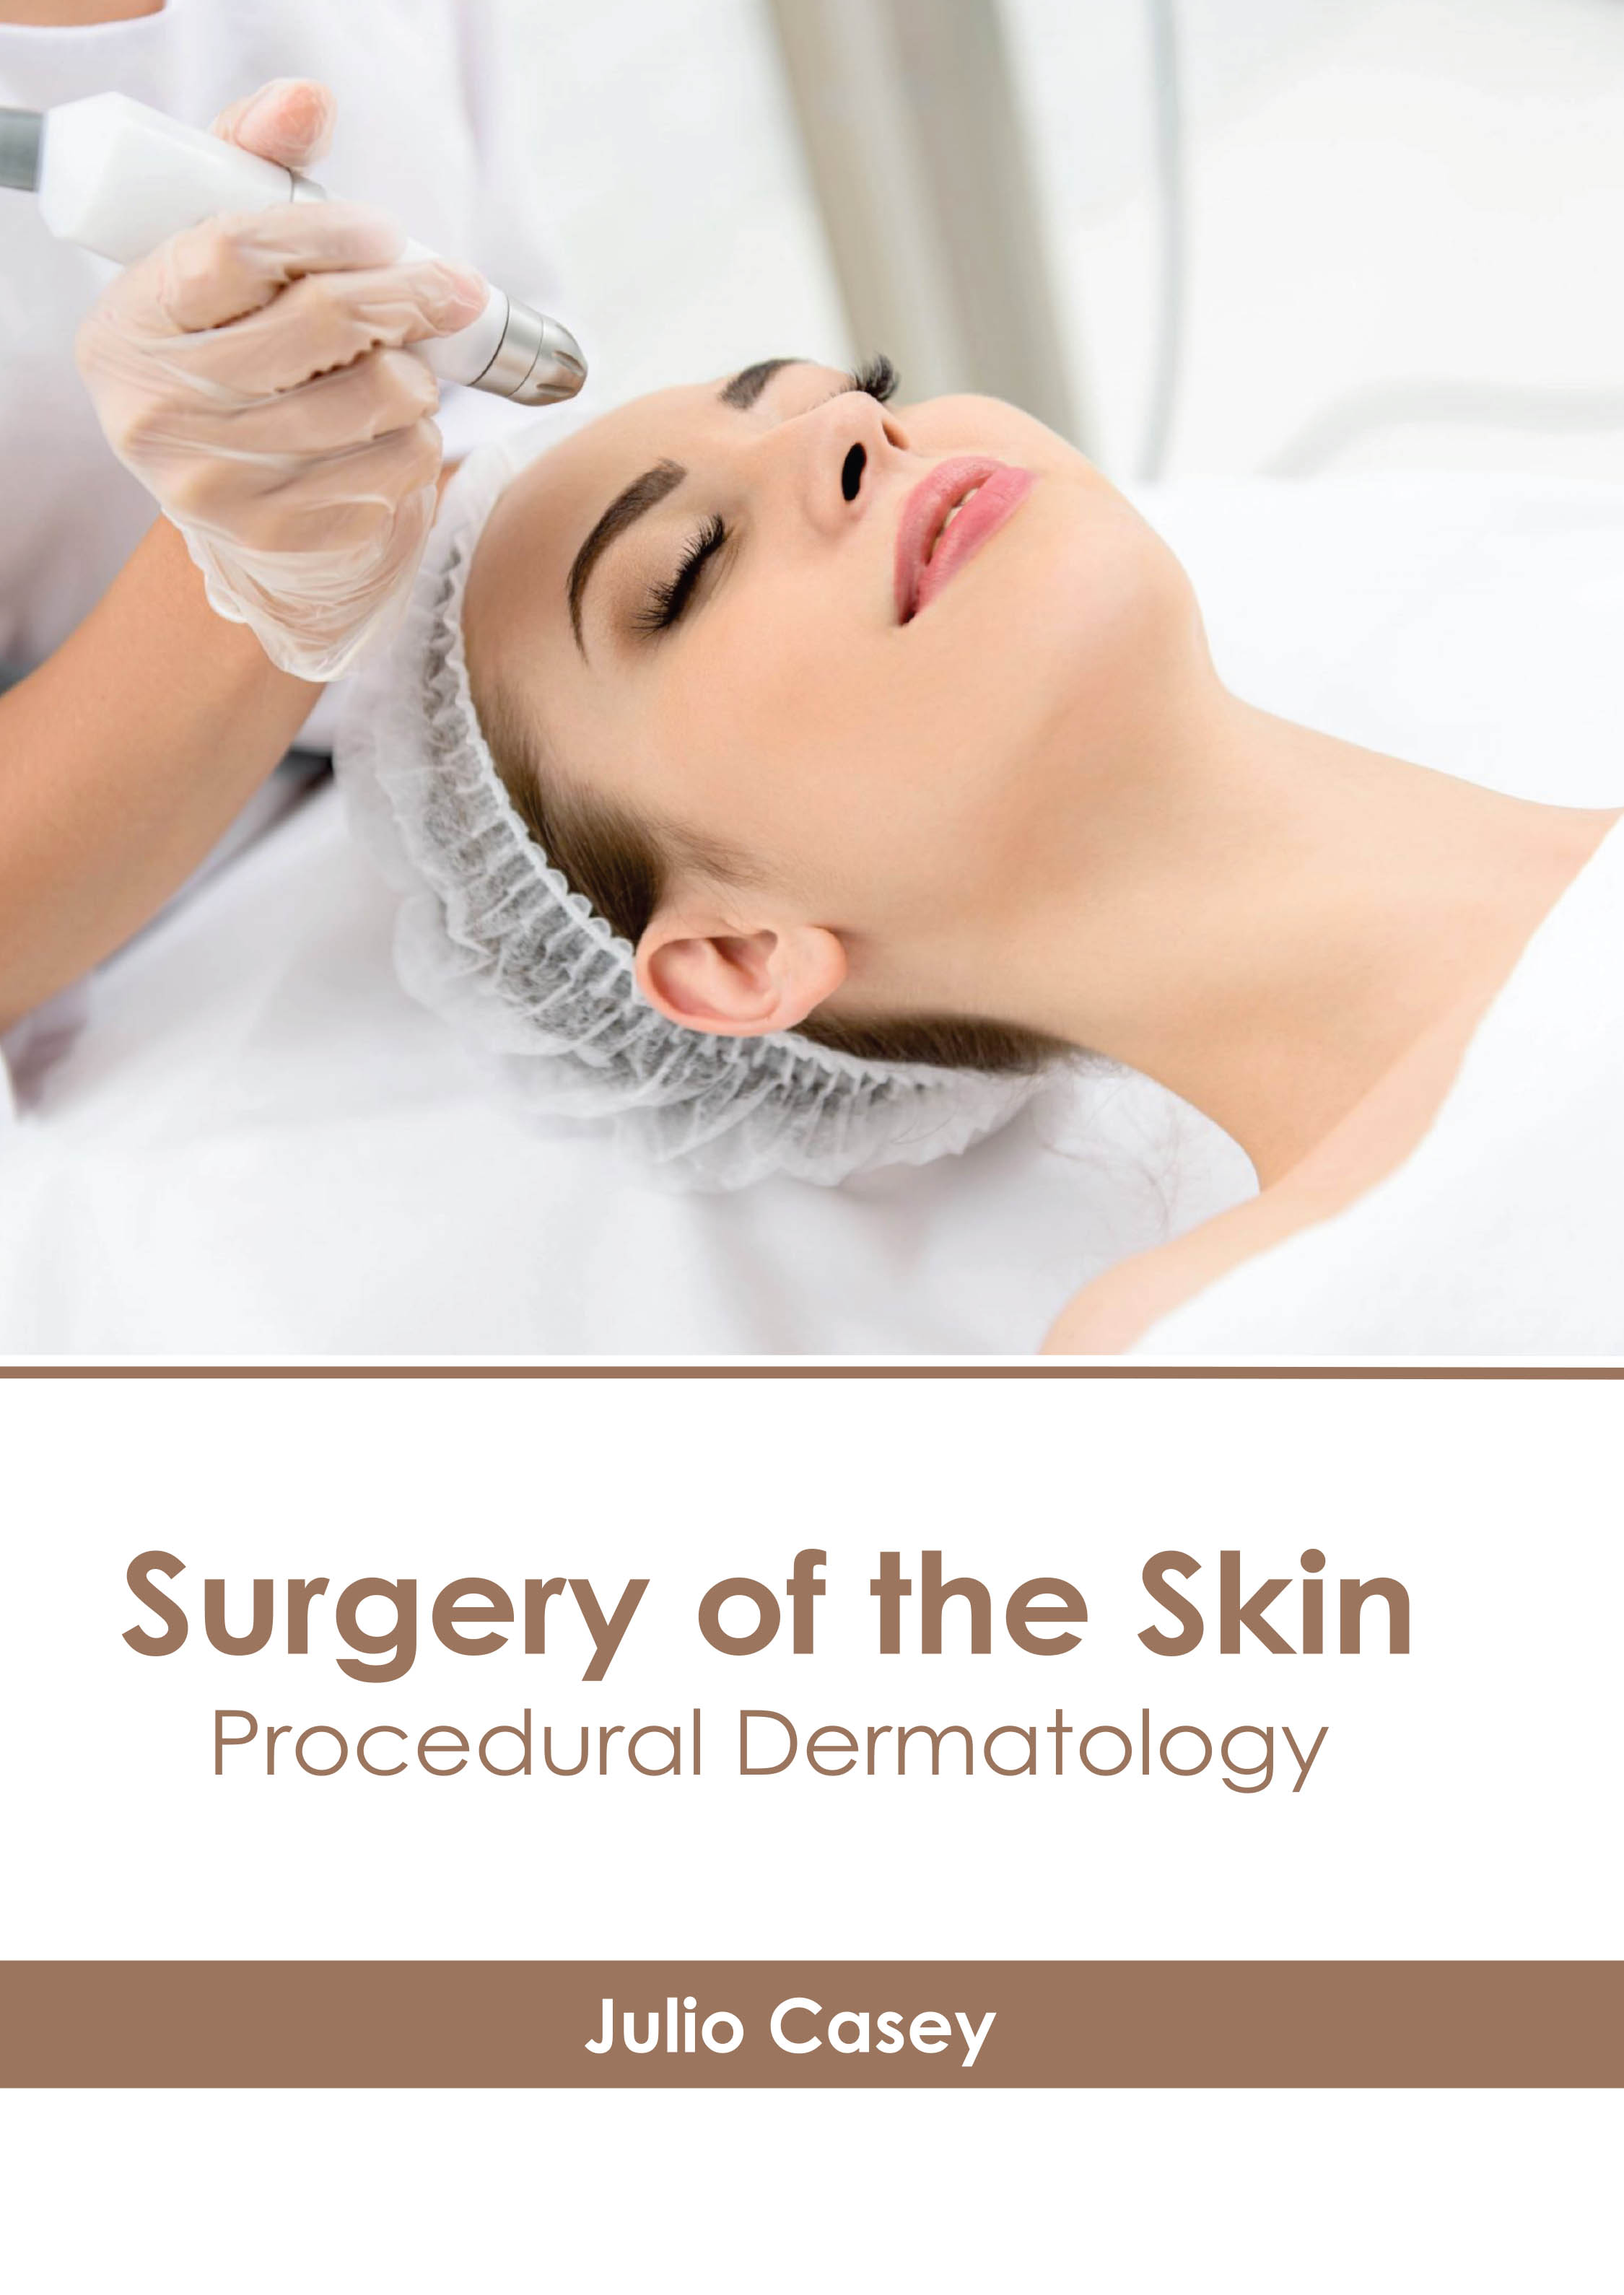 

exclusive-publishers/american-medical-publishers/surgery-of-the-skin-procedural-dermatology-9781639270668